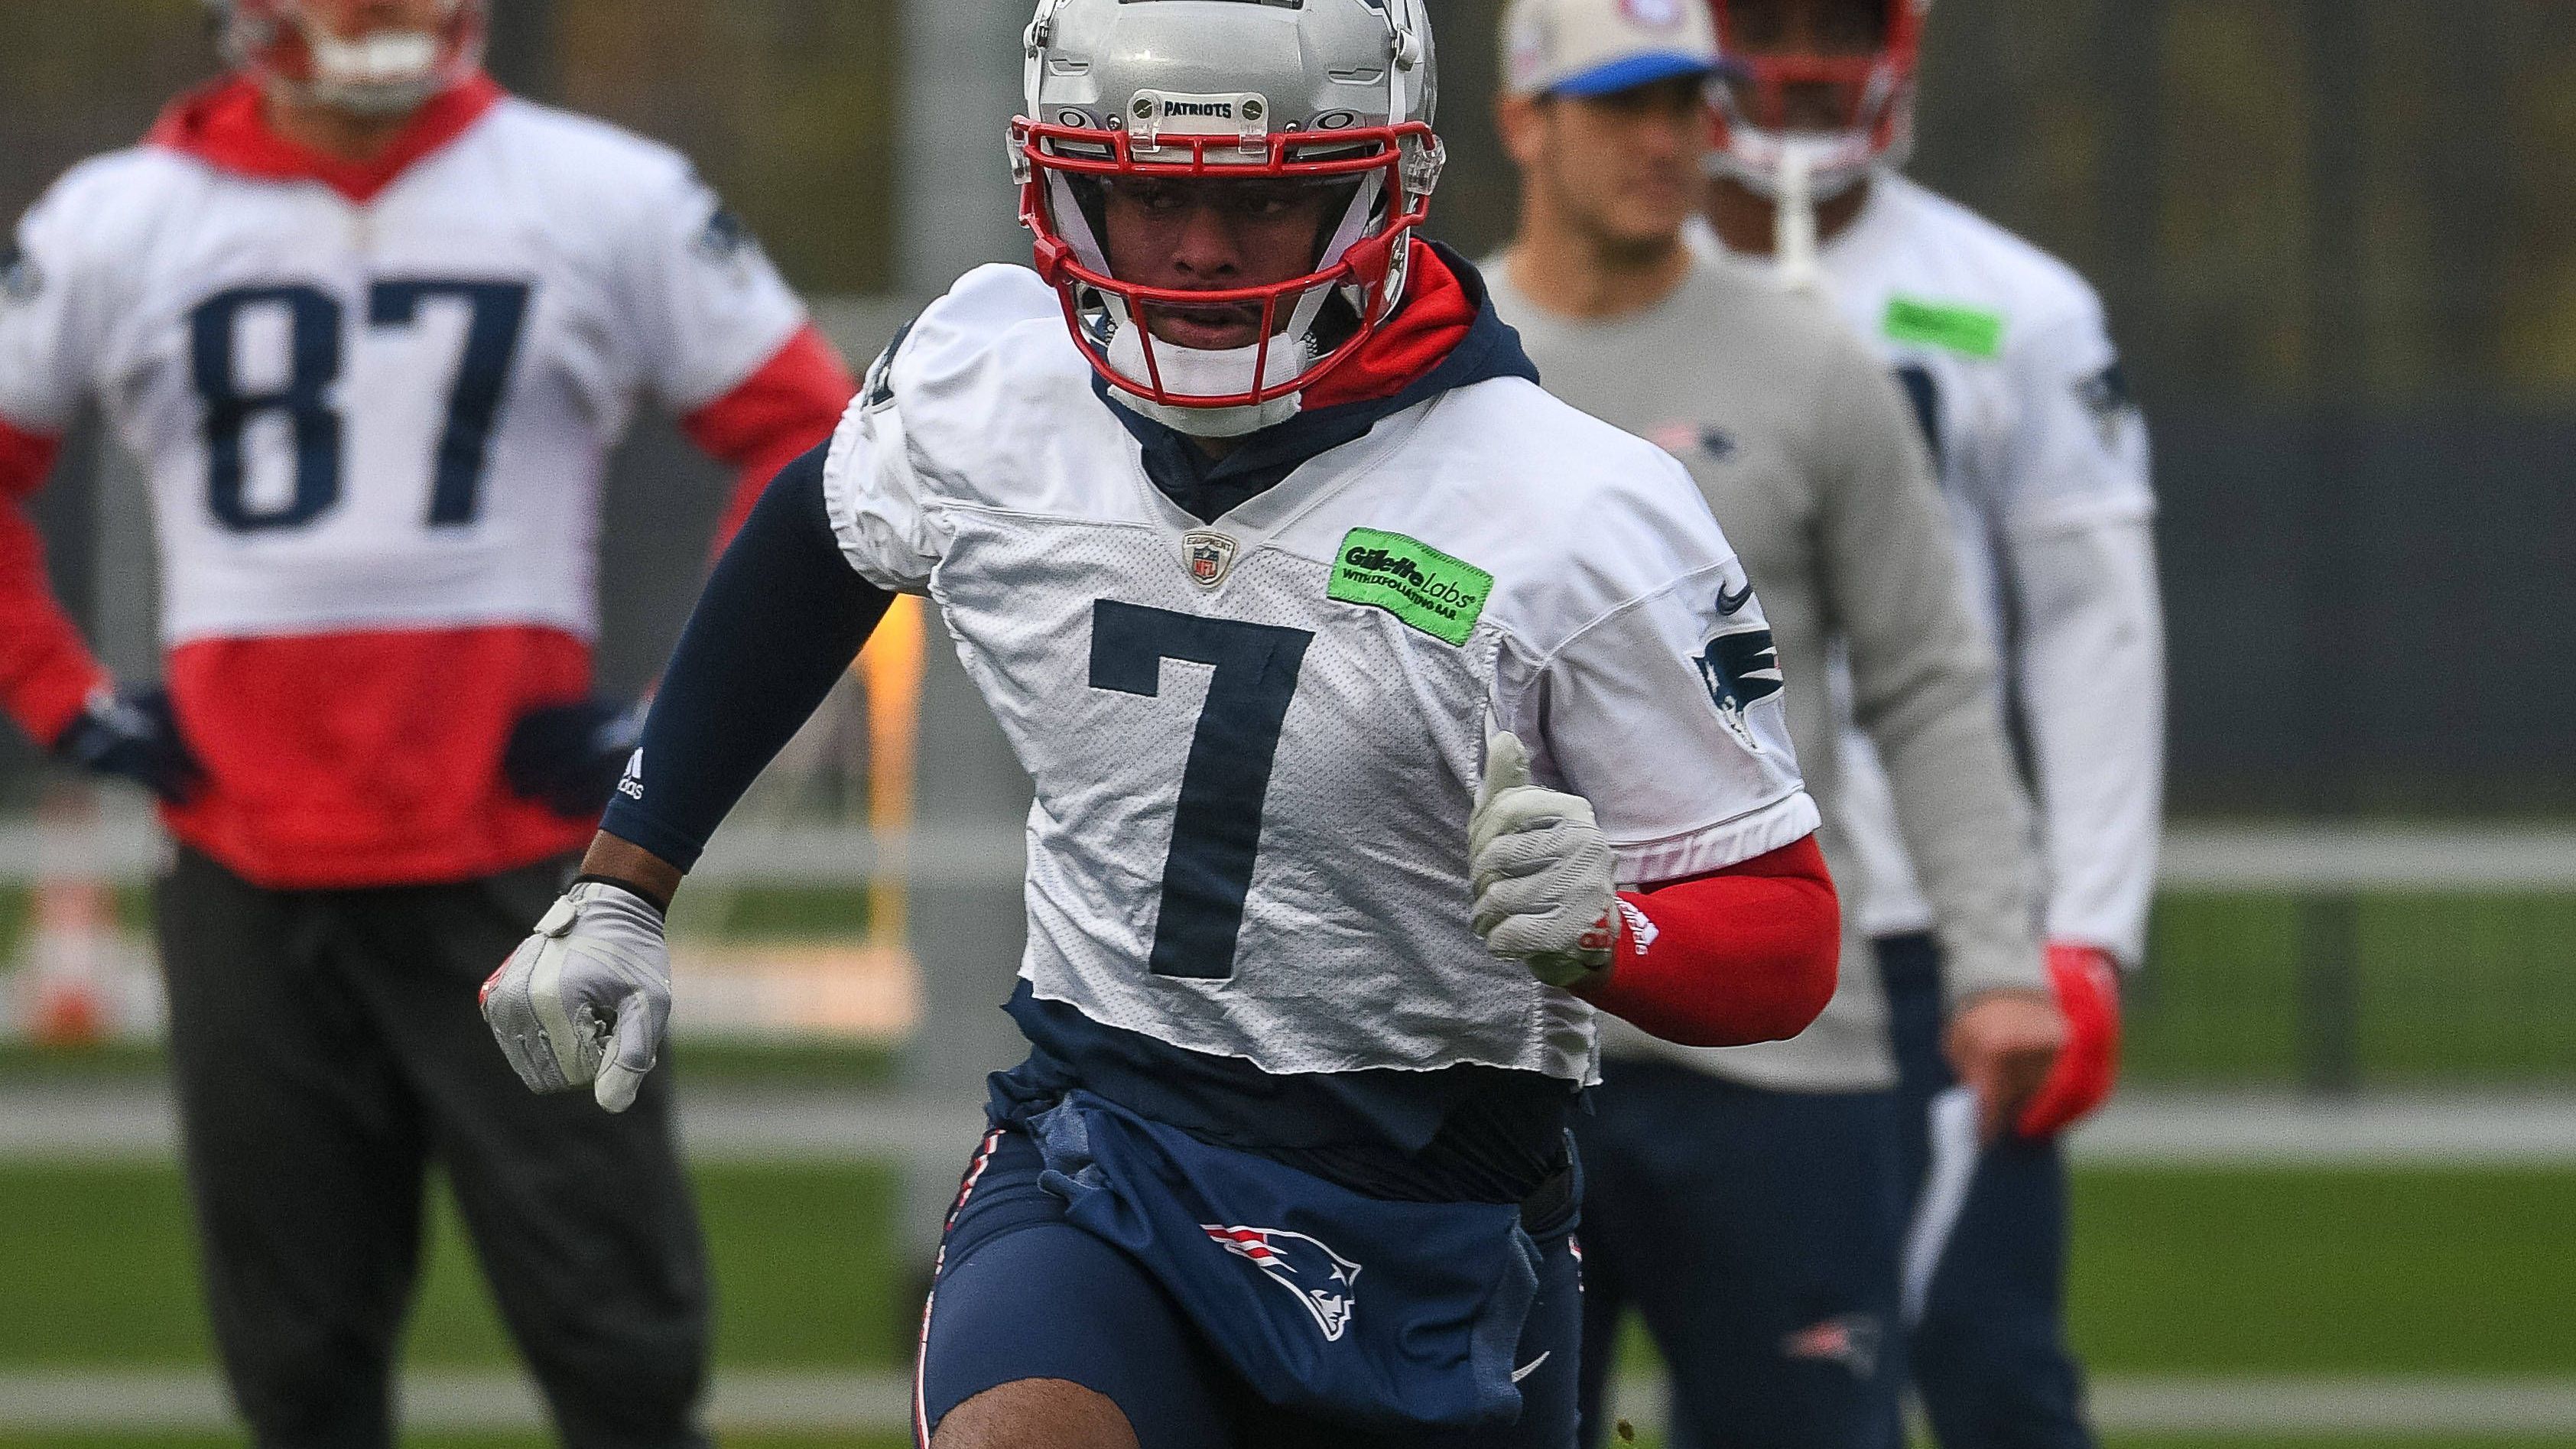 <strong>New England Patrots</strong><br>Volontary Minicamp: 23./24. April<br>OTA Offseason Workouts: 20./21. Mai, 23. Mai, 29. - 31. Mai, 3./4. Juni, 6./7. Juni<br>Mandatory Minicamp: 11. - 13. Juni